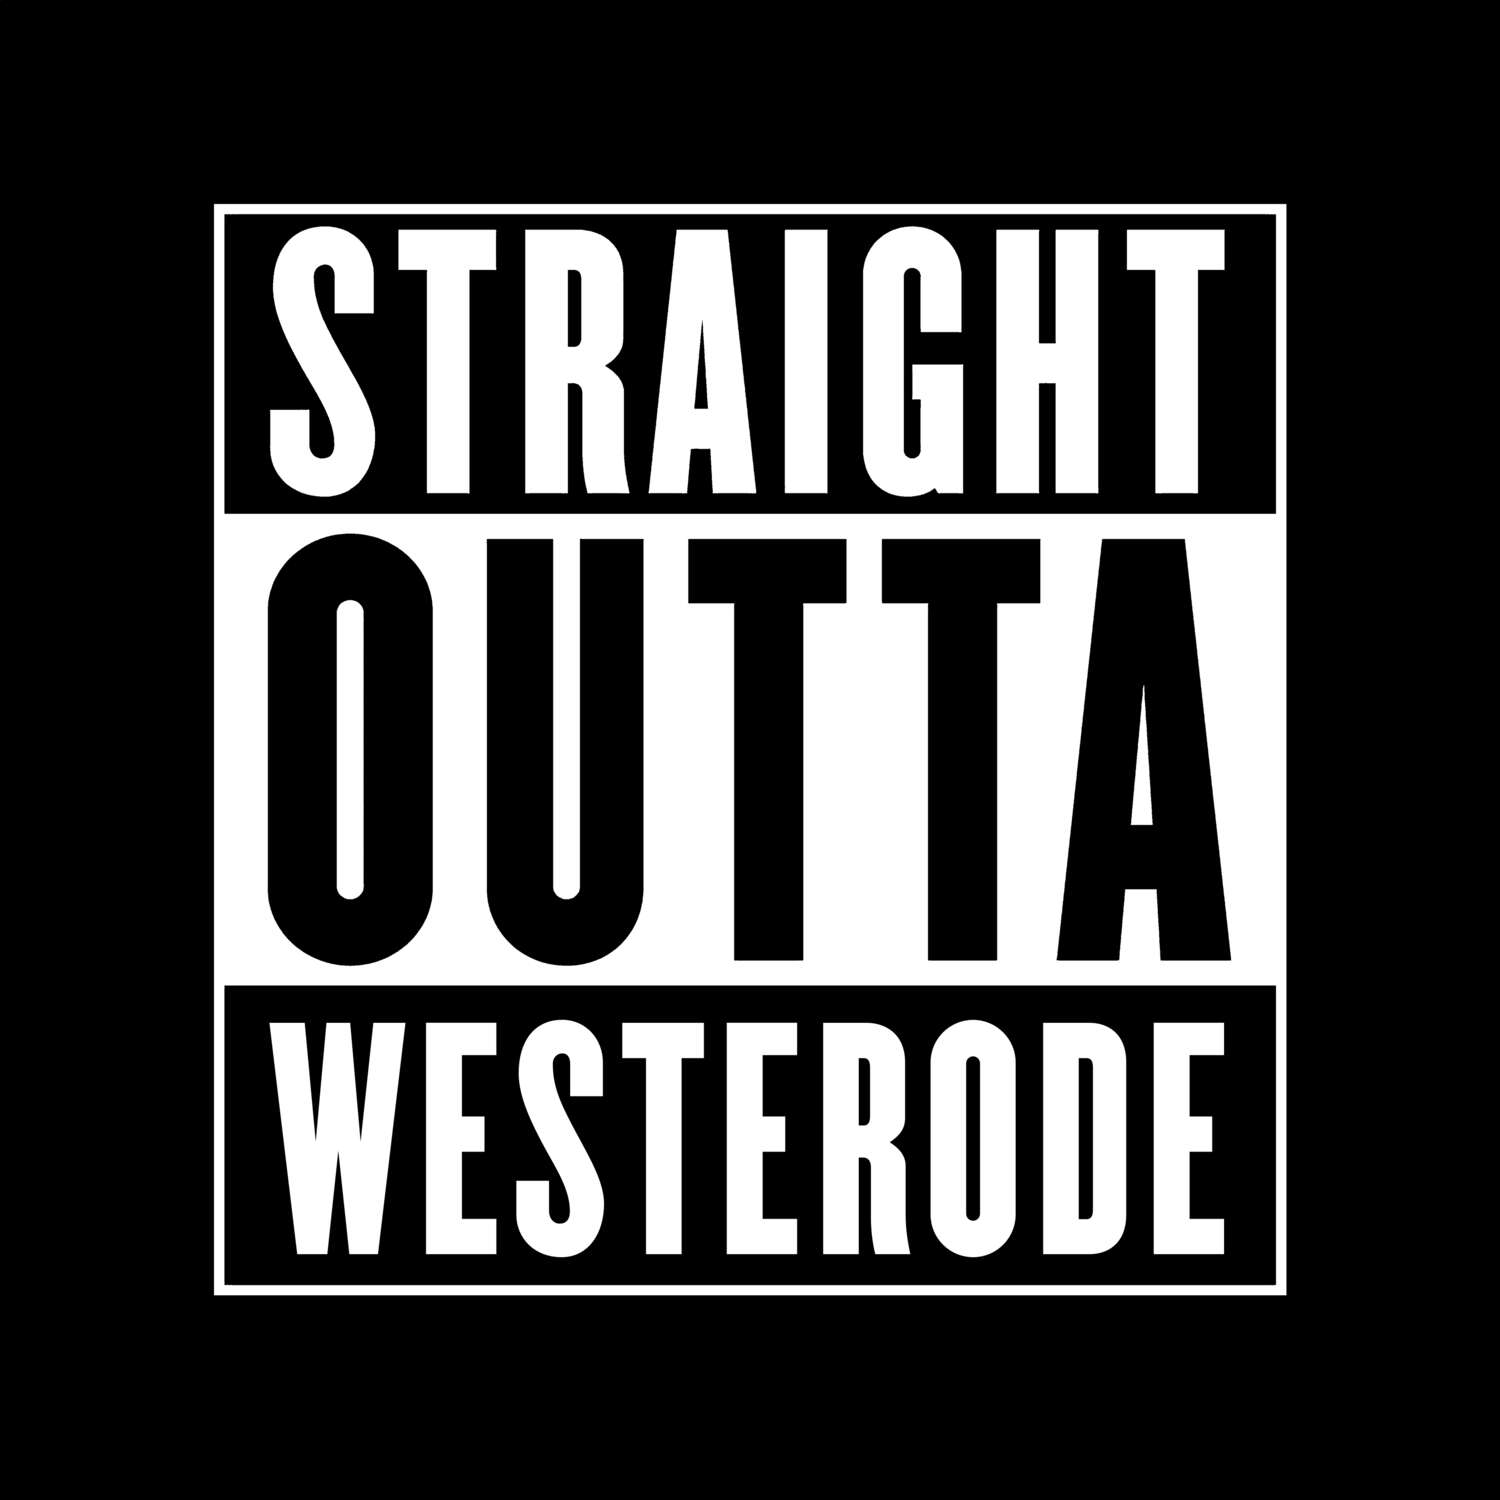 Westerode T-Shirt »Straight Outta«